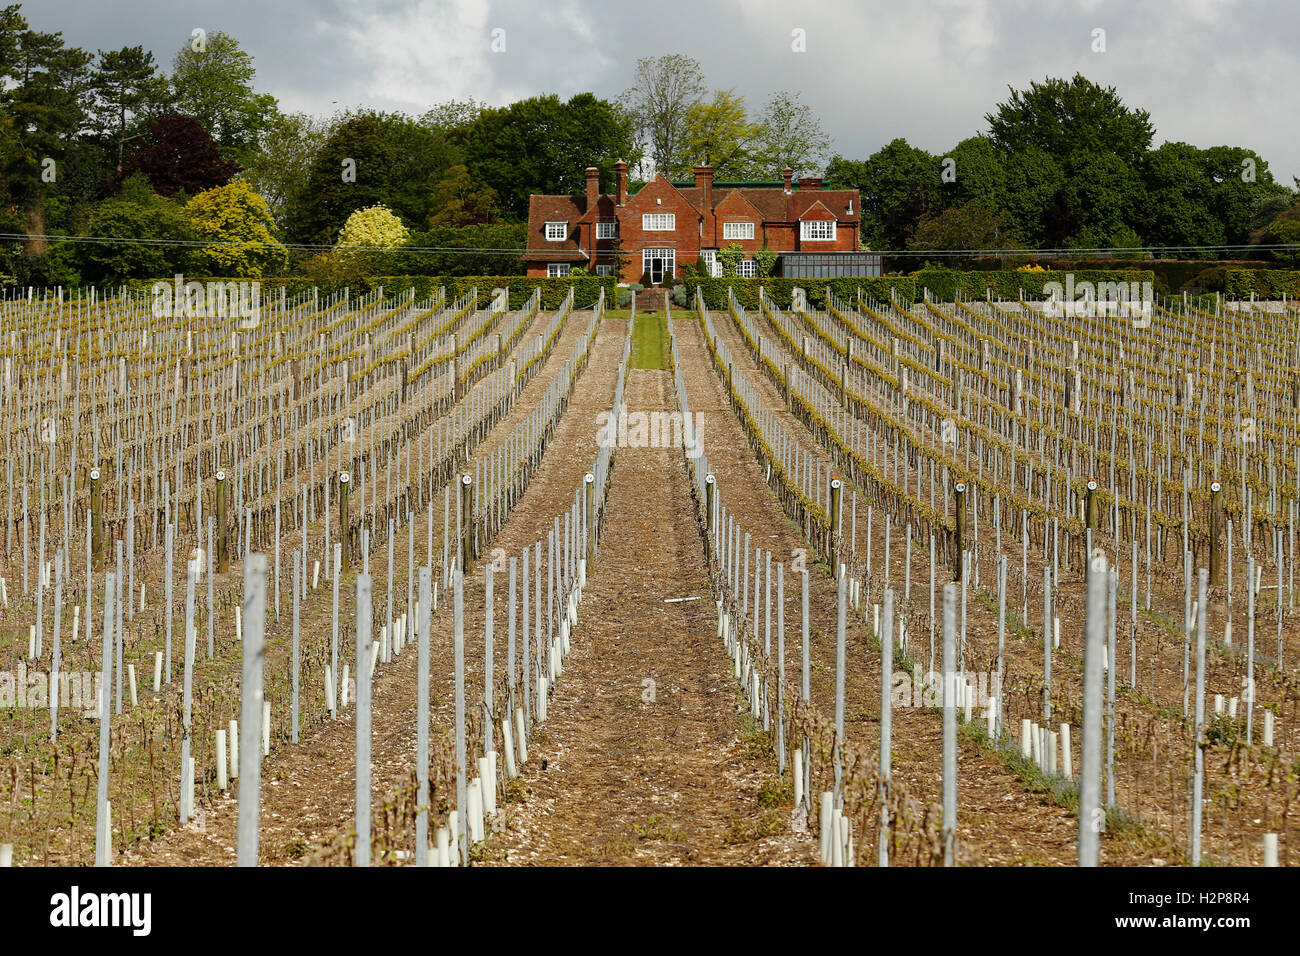 This years vines come into leaf at Hambledon Vineyard situated on the South Downs near Waterlooville in Hampshire May 20, 2015. Stock Photo